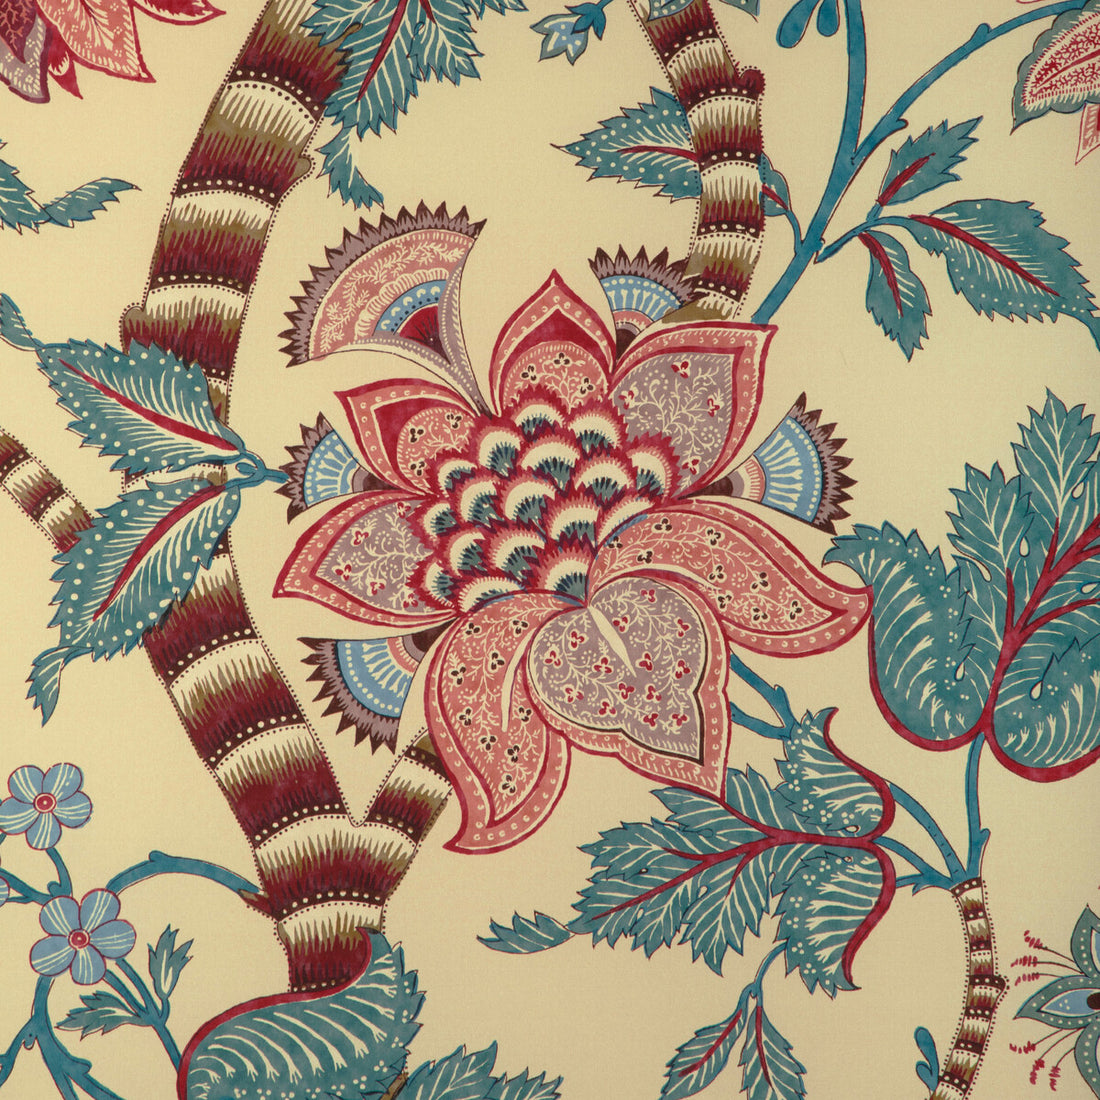 Cadenet Print fabric in beige/teal color - pattern 8023105.1635.0 - by Brunschwig &amp; Fils in the Cadenet collection